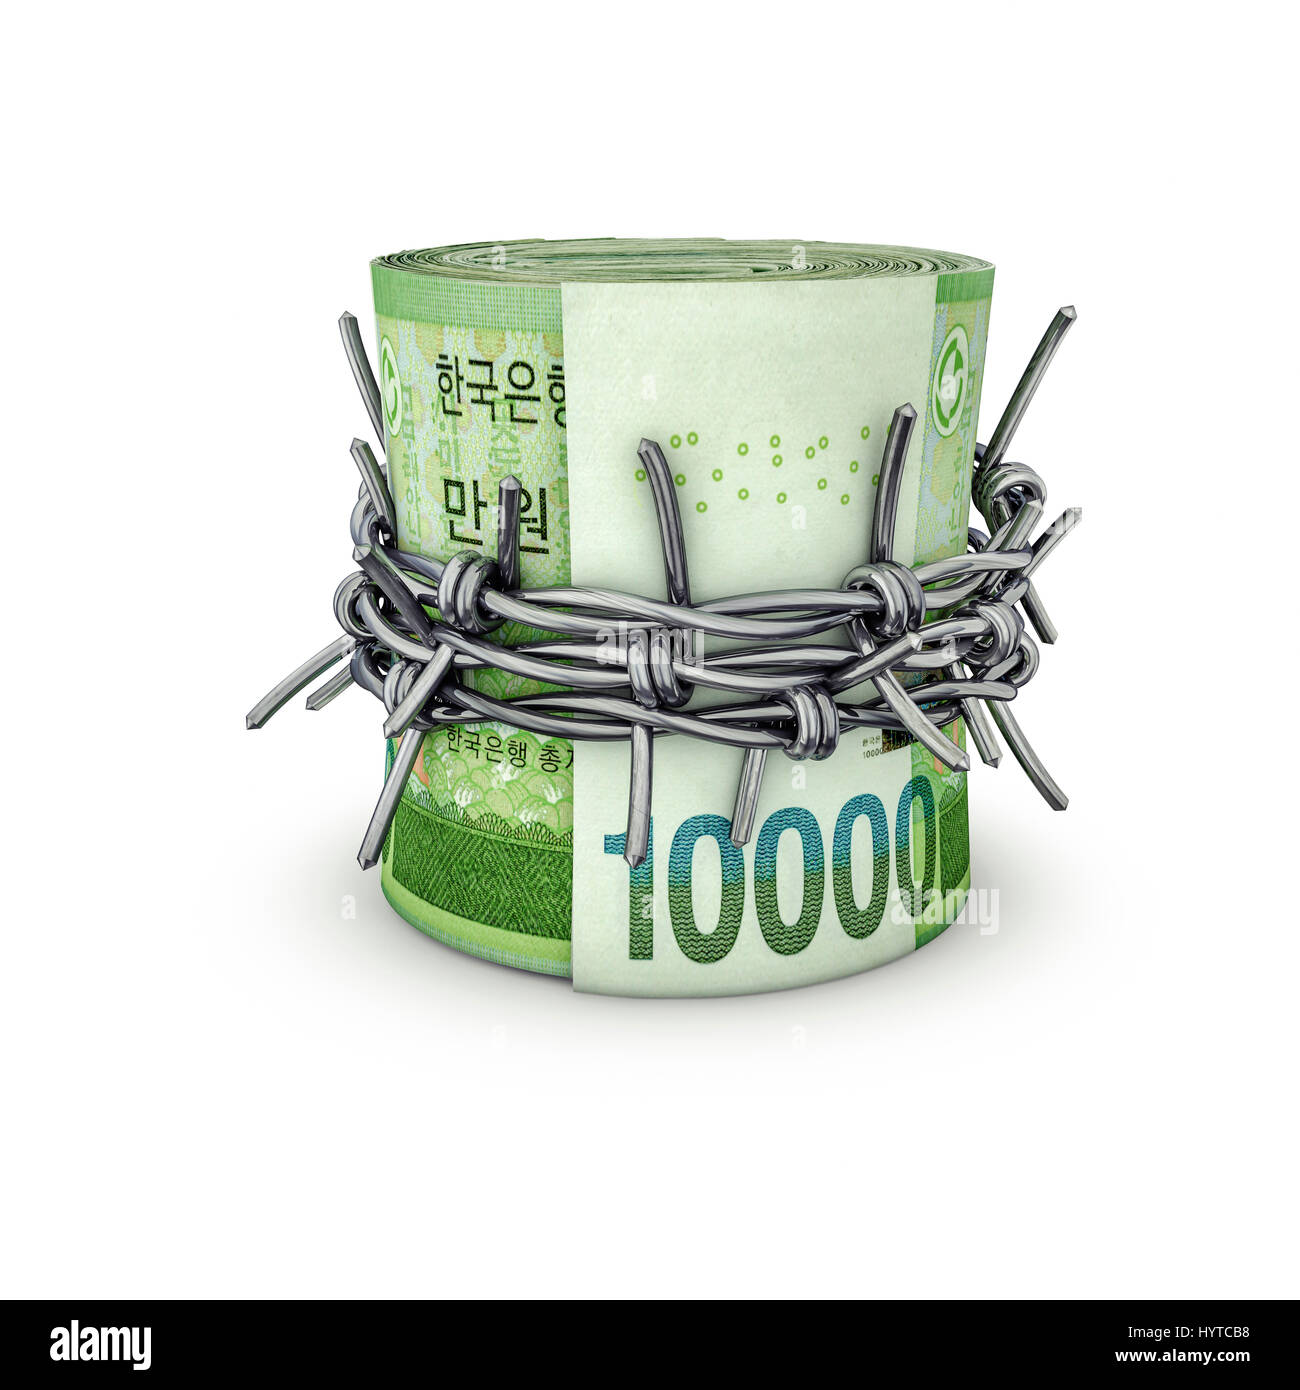 Forbidden money South Korean won / 3D illustration of rolled up South Korean ten thousand won notes tied with barbed wire Stock Photo